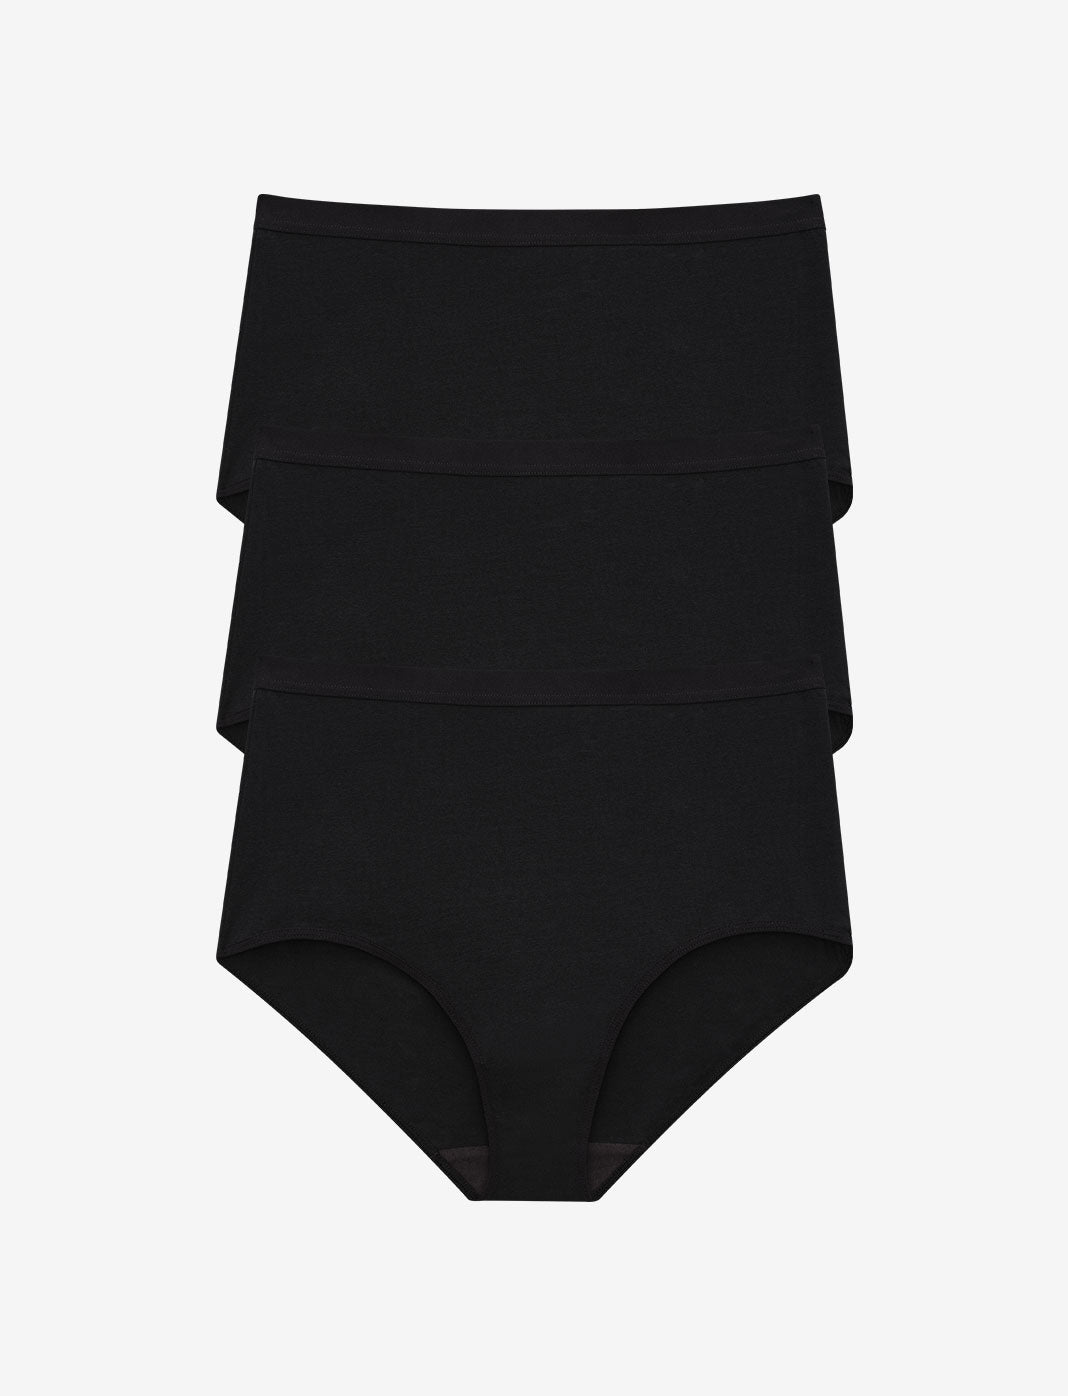 Pact Cotton Foldover Brief 4-pack in Black